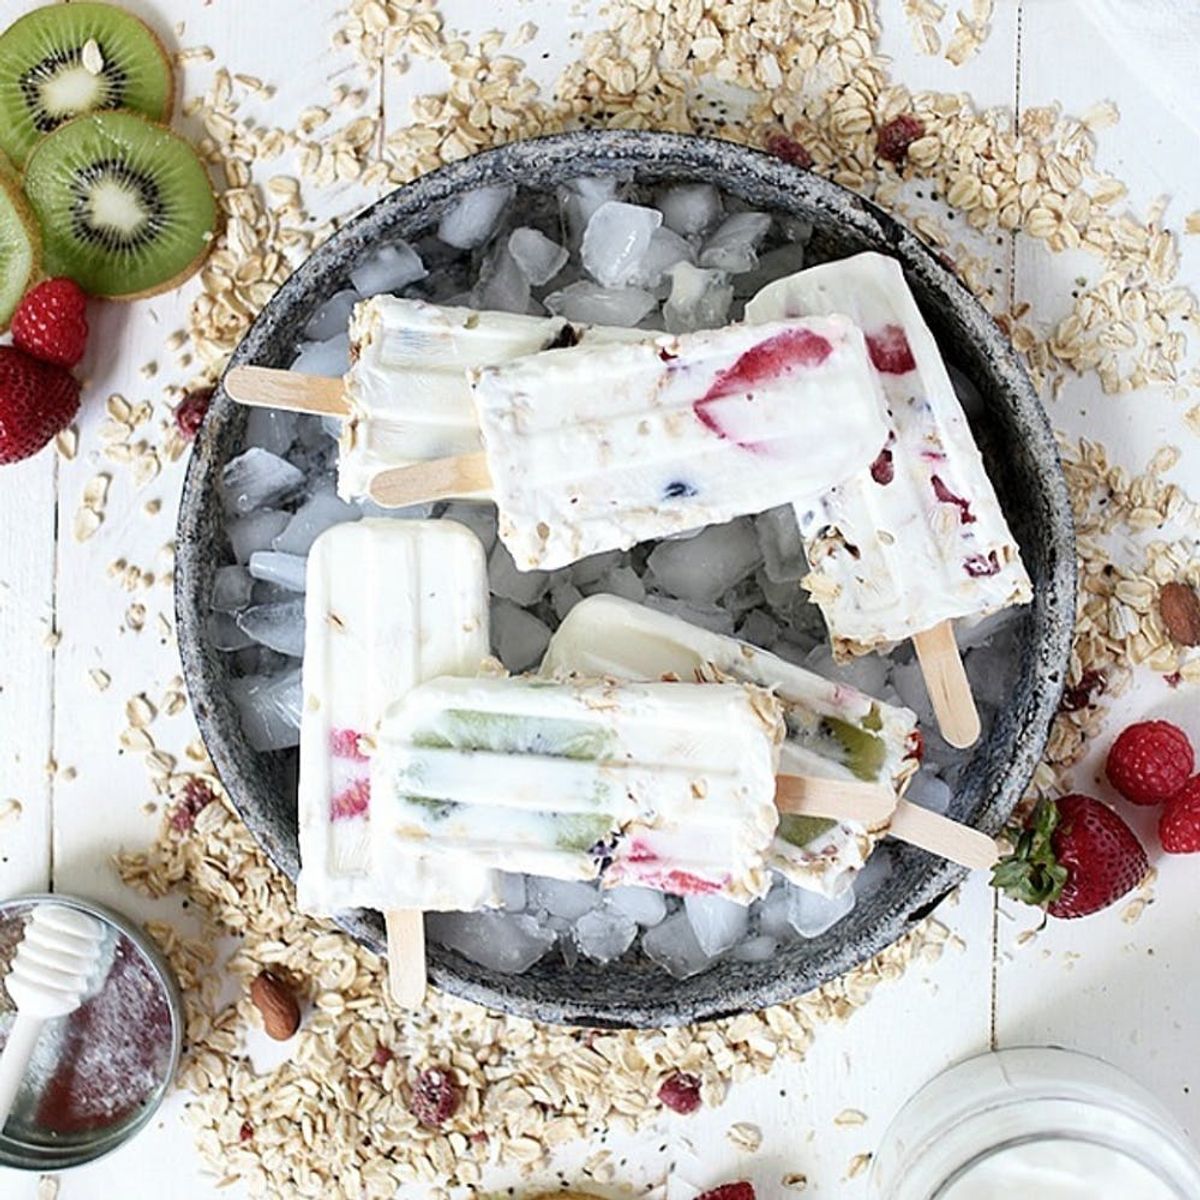 13 Breakfast Ice Pops That Are Cooler Than Cool